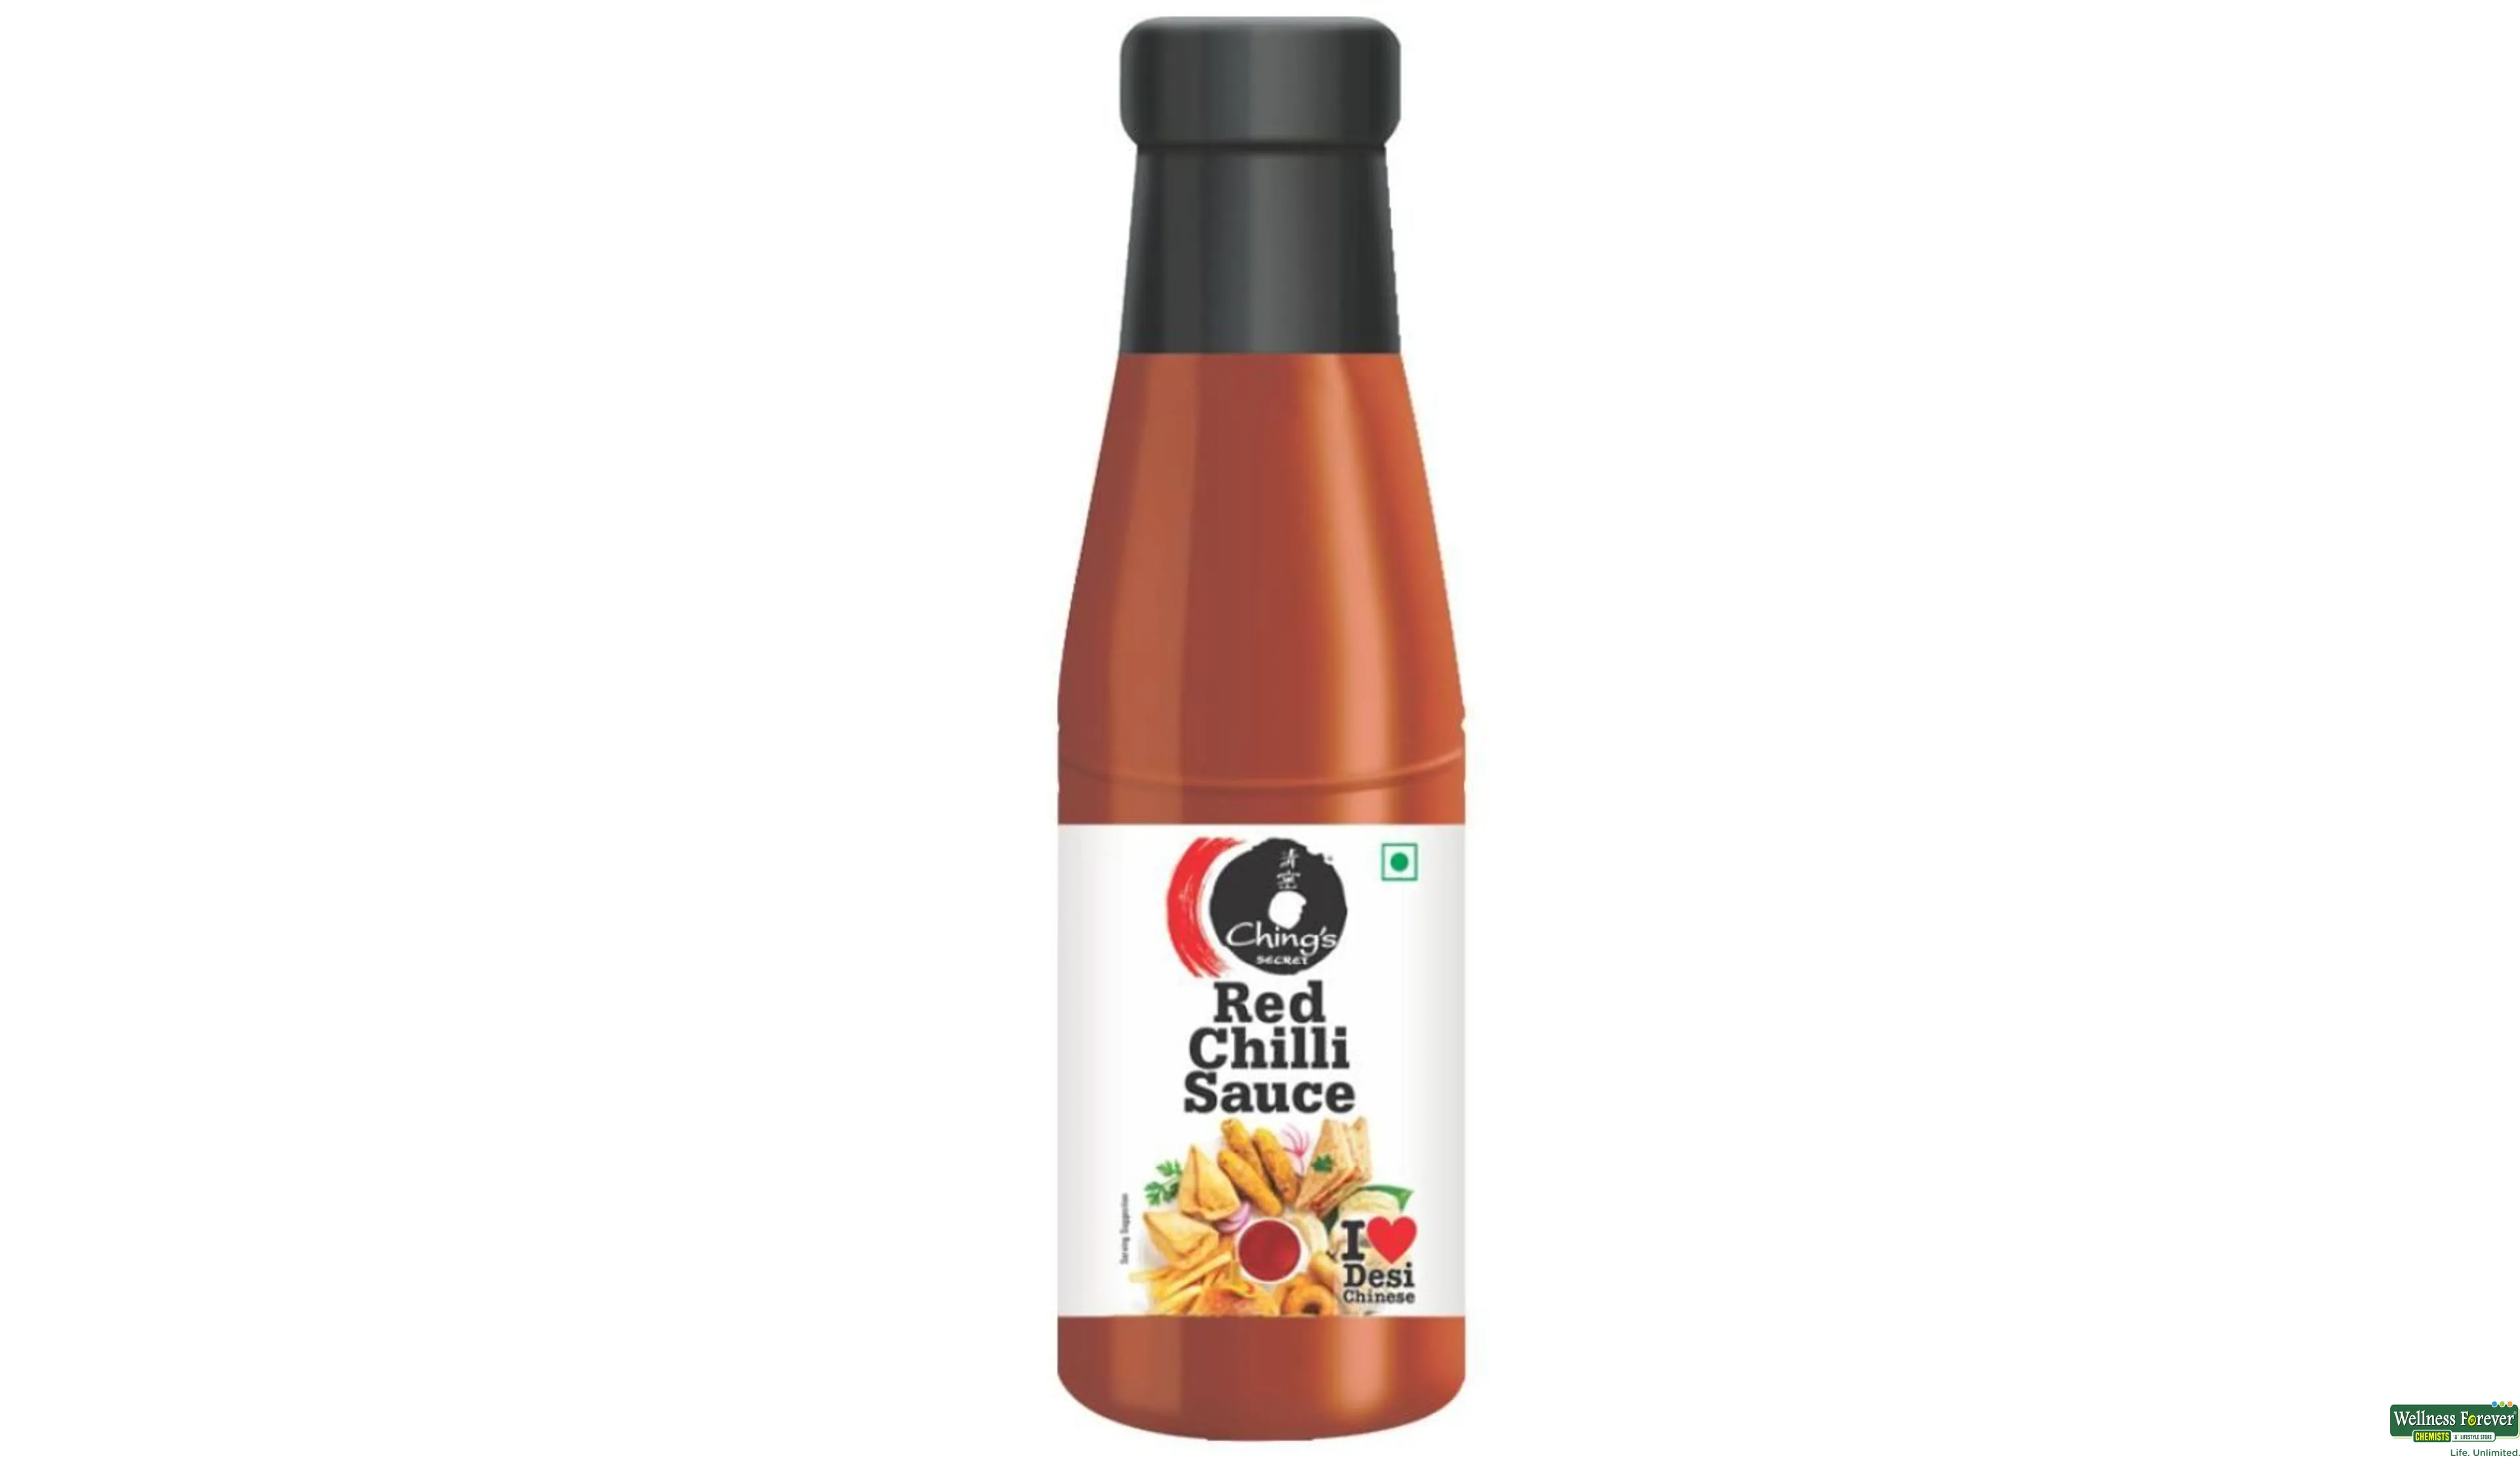 CHINGS RED CHILLI SAUCE 200GM- 2, 200GM, 